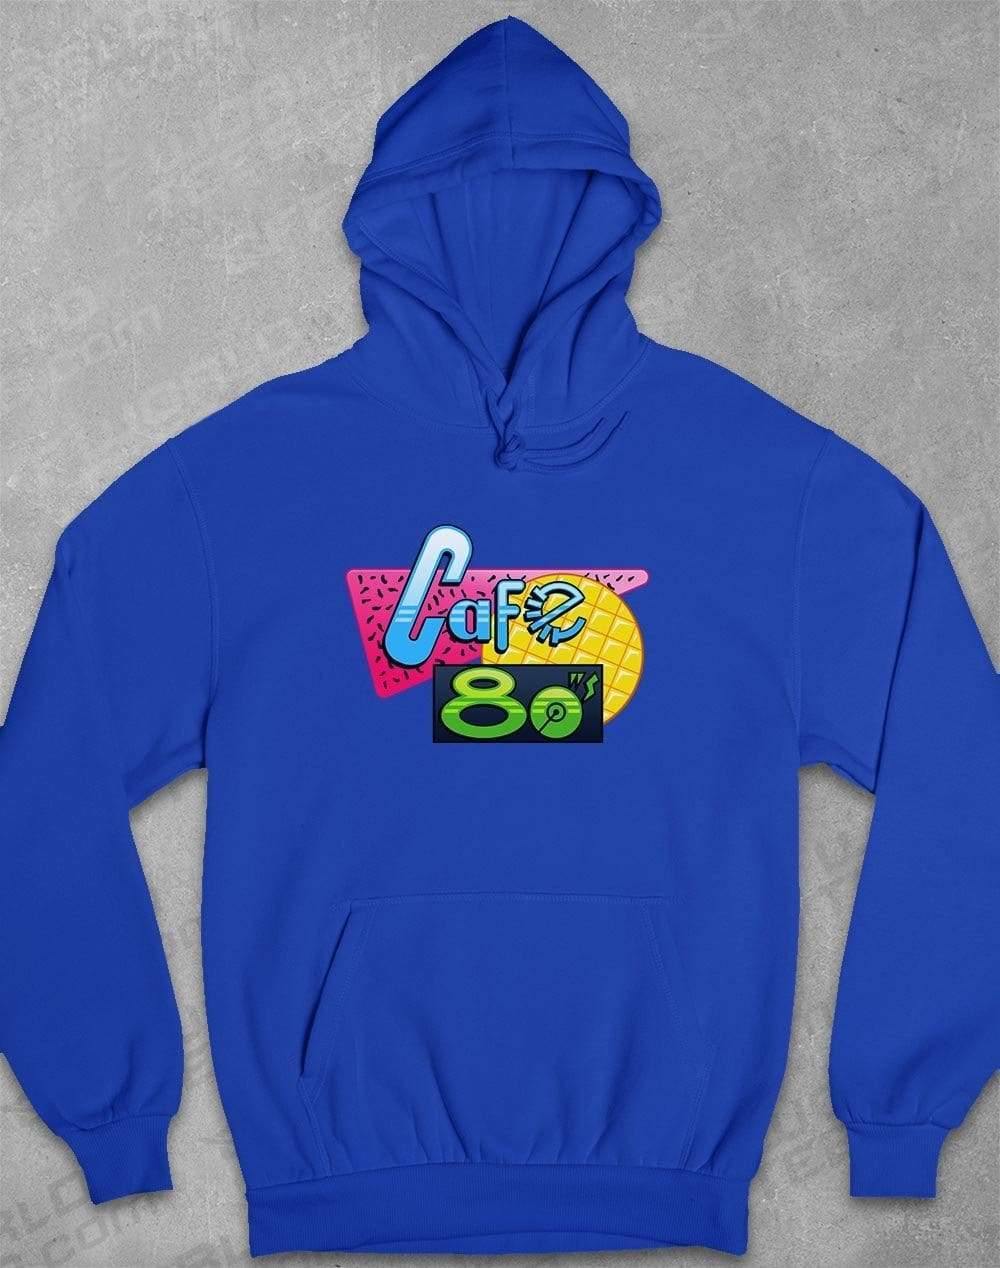 Cafe 80's Hoodie XS / Royal Blue  - Off World Tees